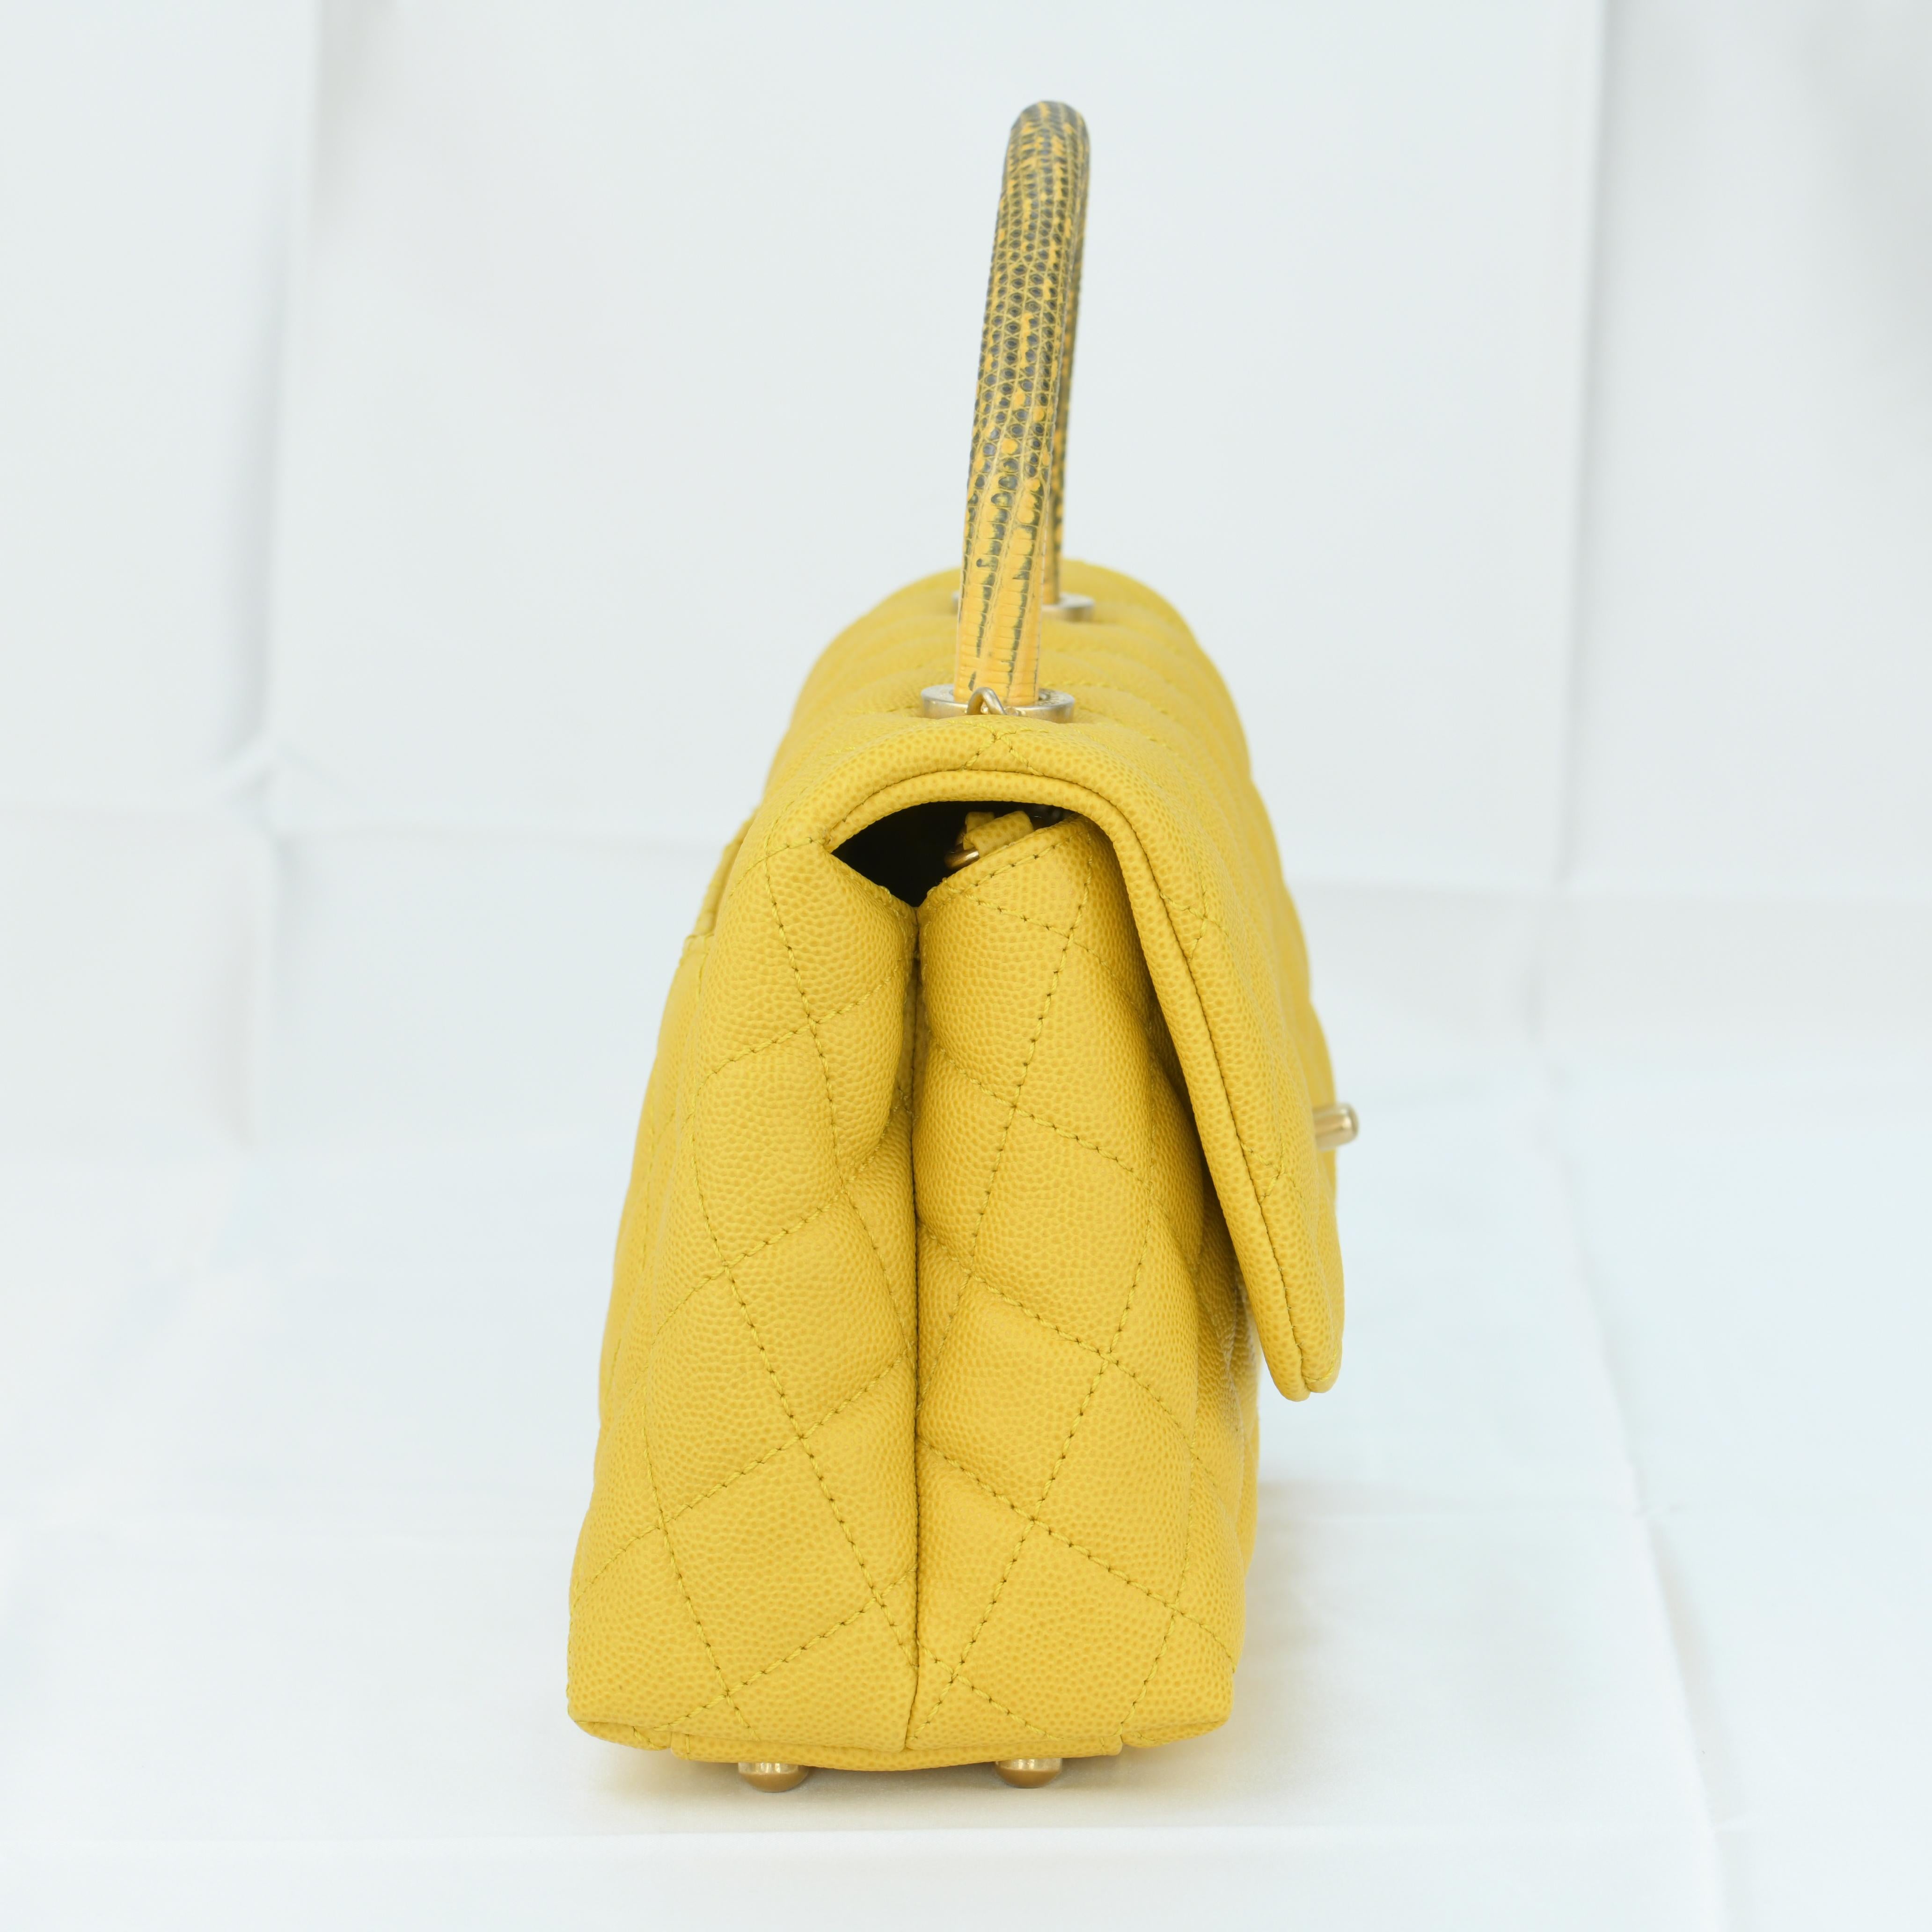 Chanel Yellow Small Canary Caviar Quilted COCO Flap Bag with Lizard Top Handle In Excellent Condition For Sale In Banbury, GB